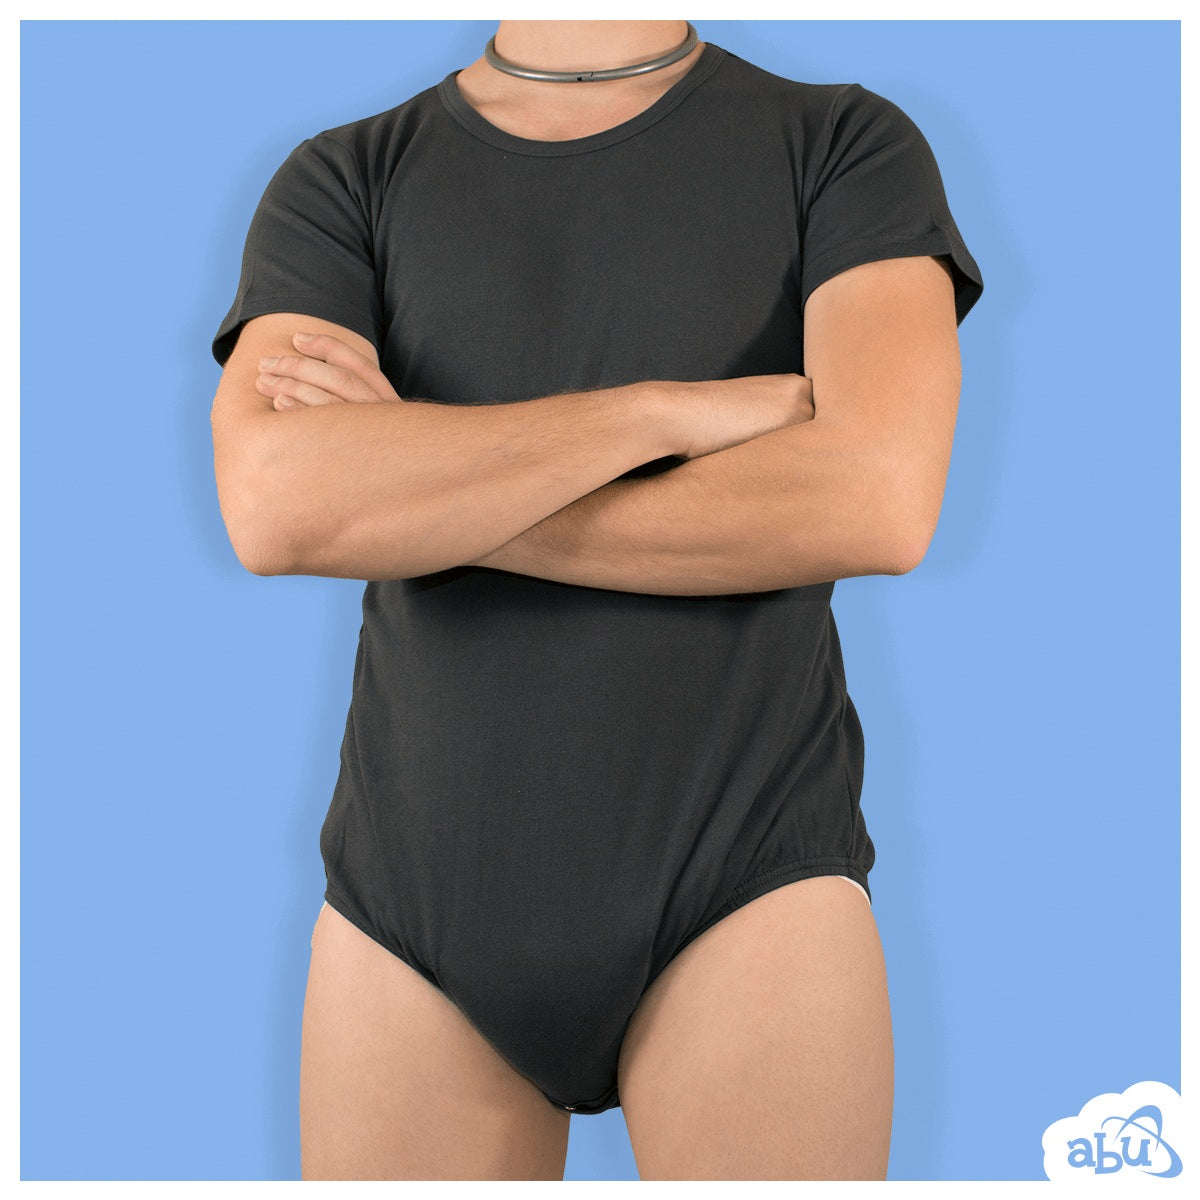 Model wearing black diapersuit with disposable diaper worn underneath